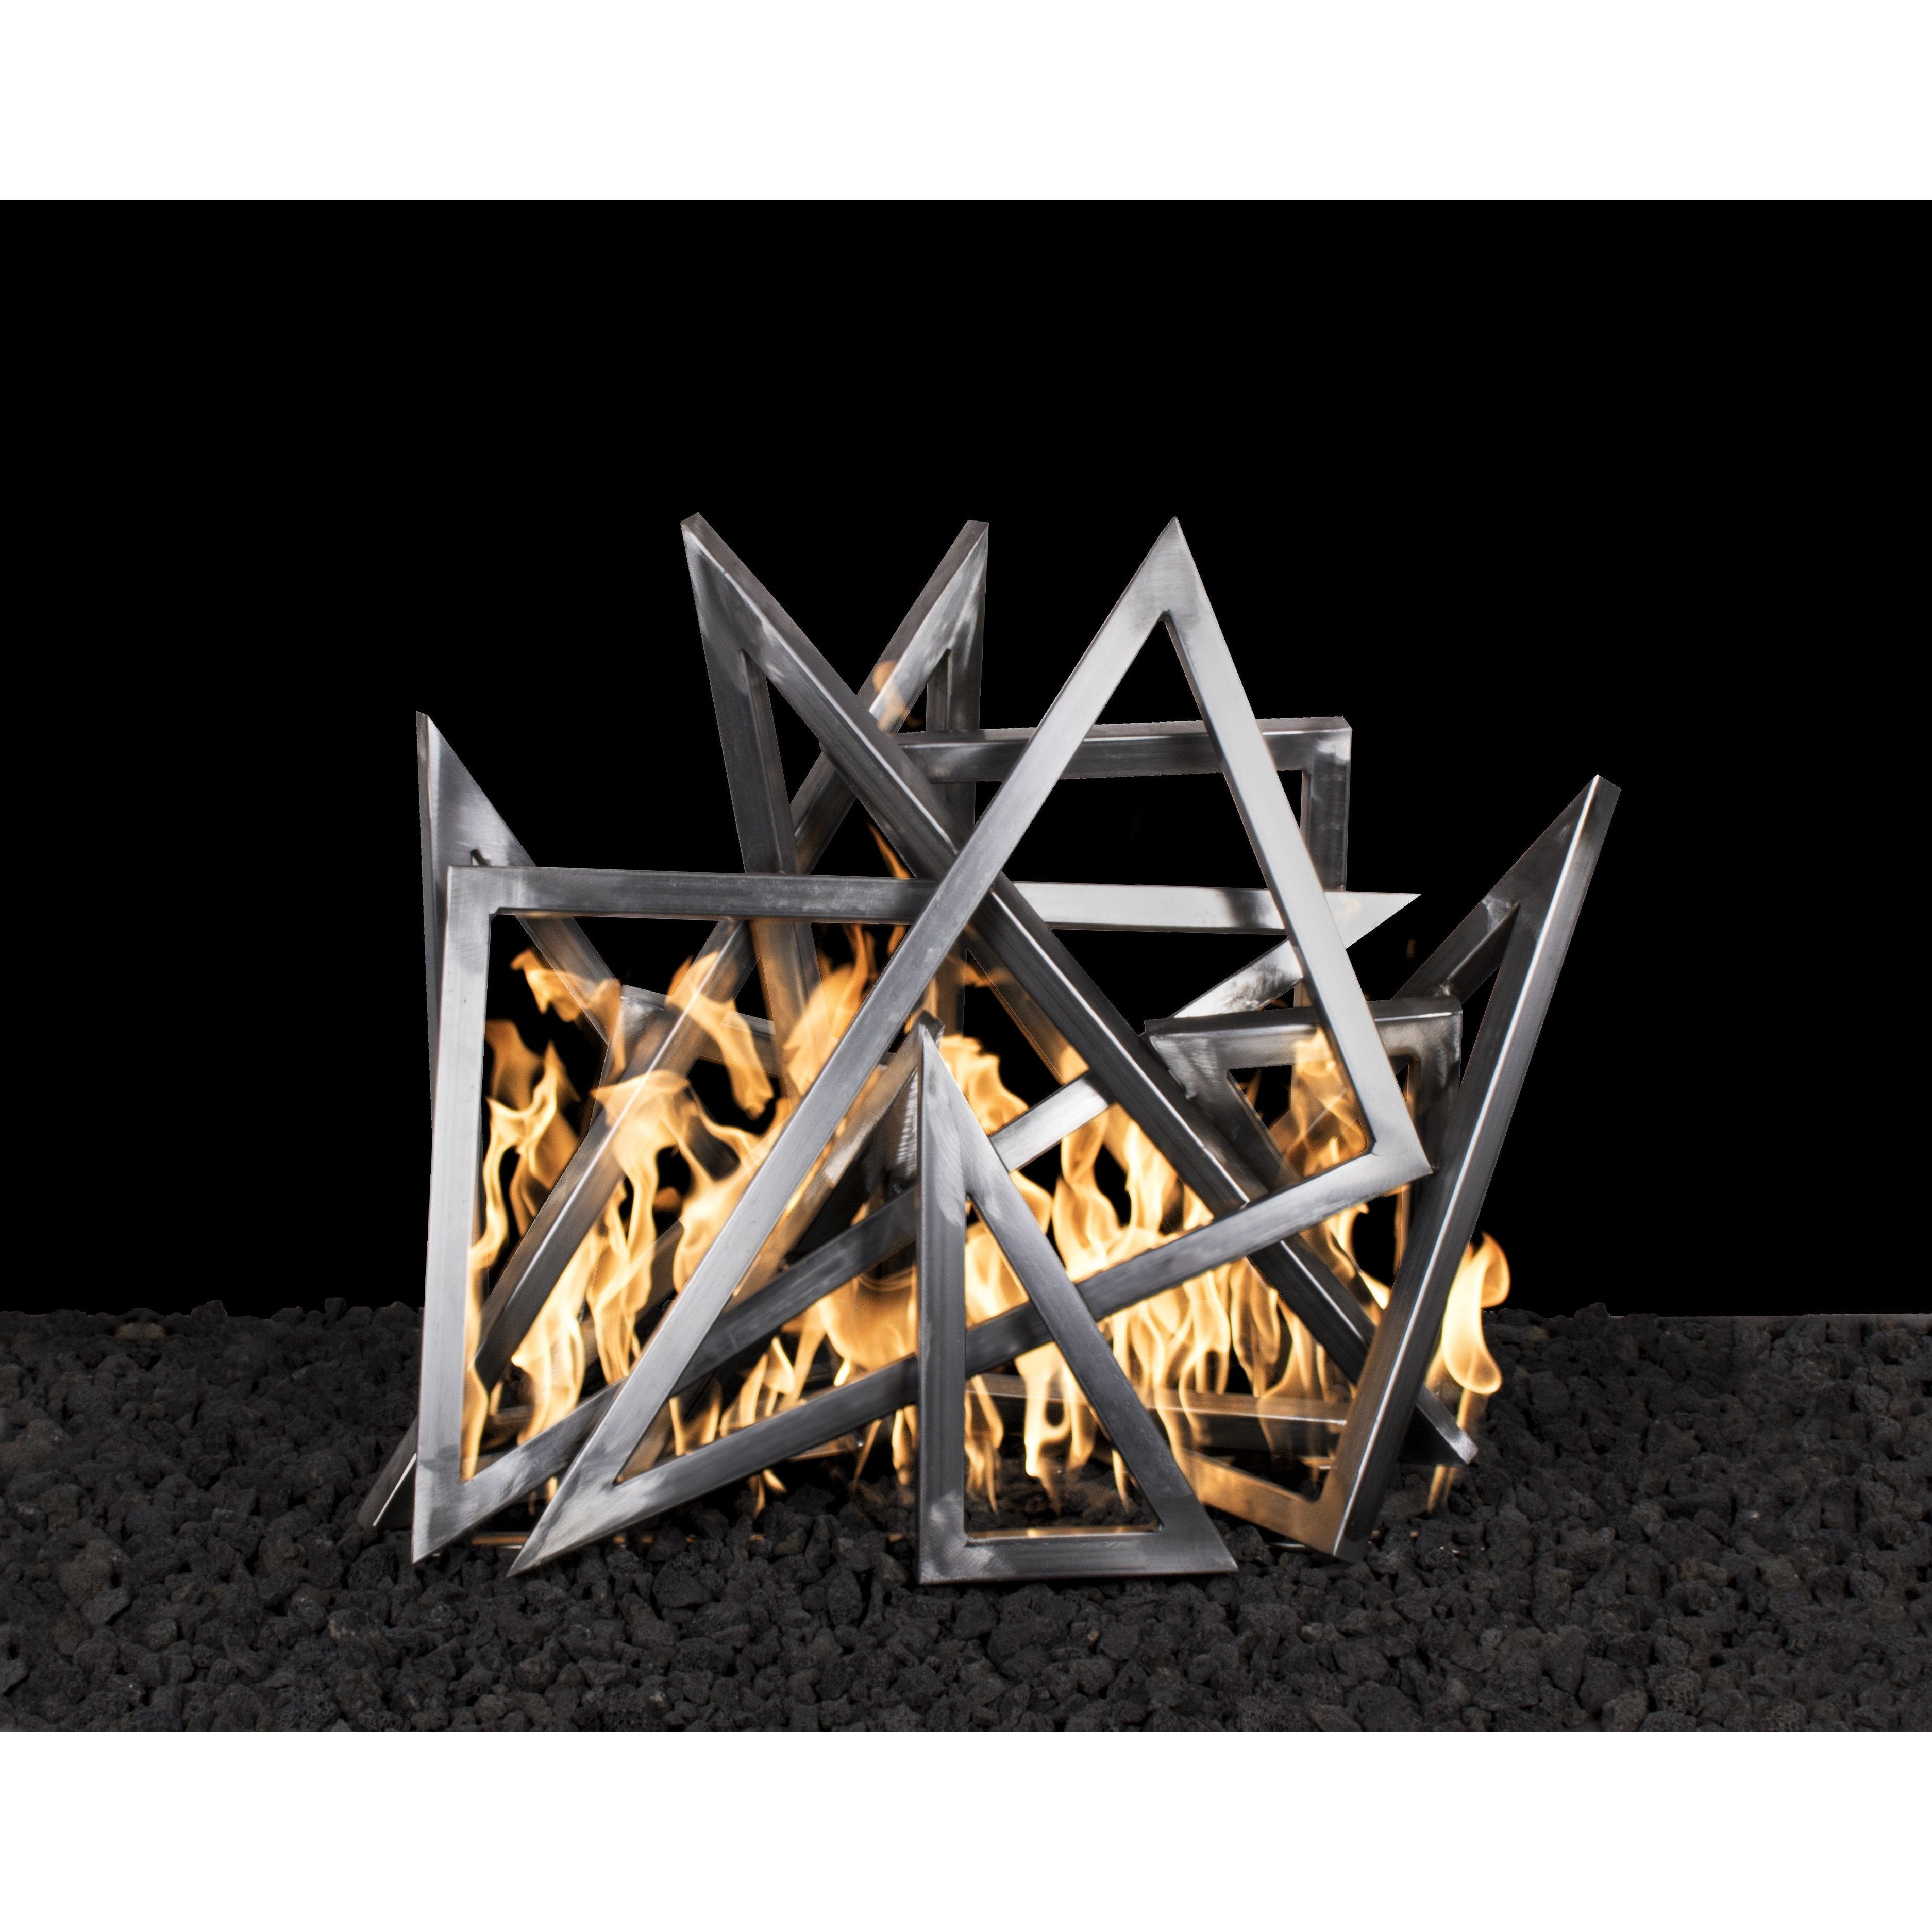 The Outdoor Plus Steel Triangle Sculpture - Fire Pit Ornament